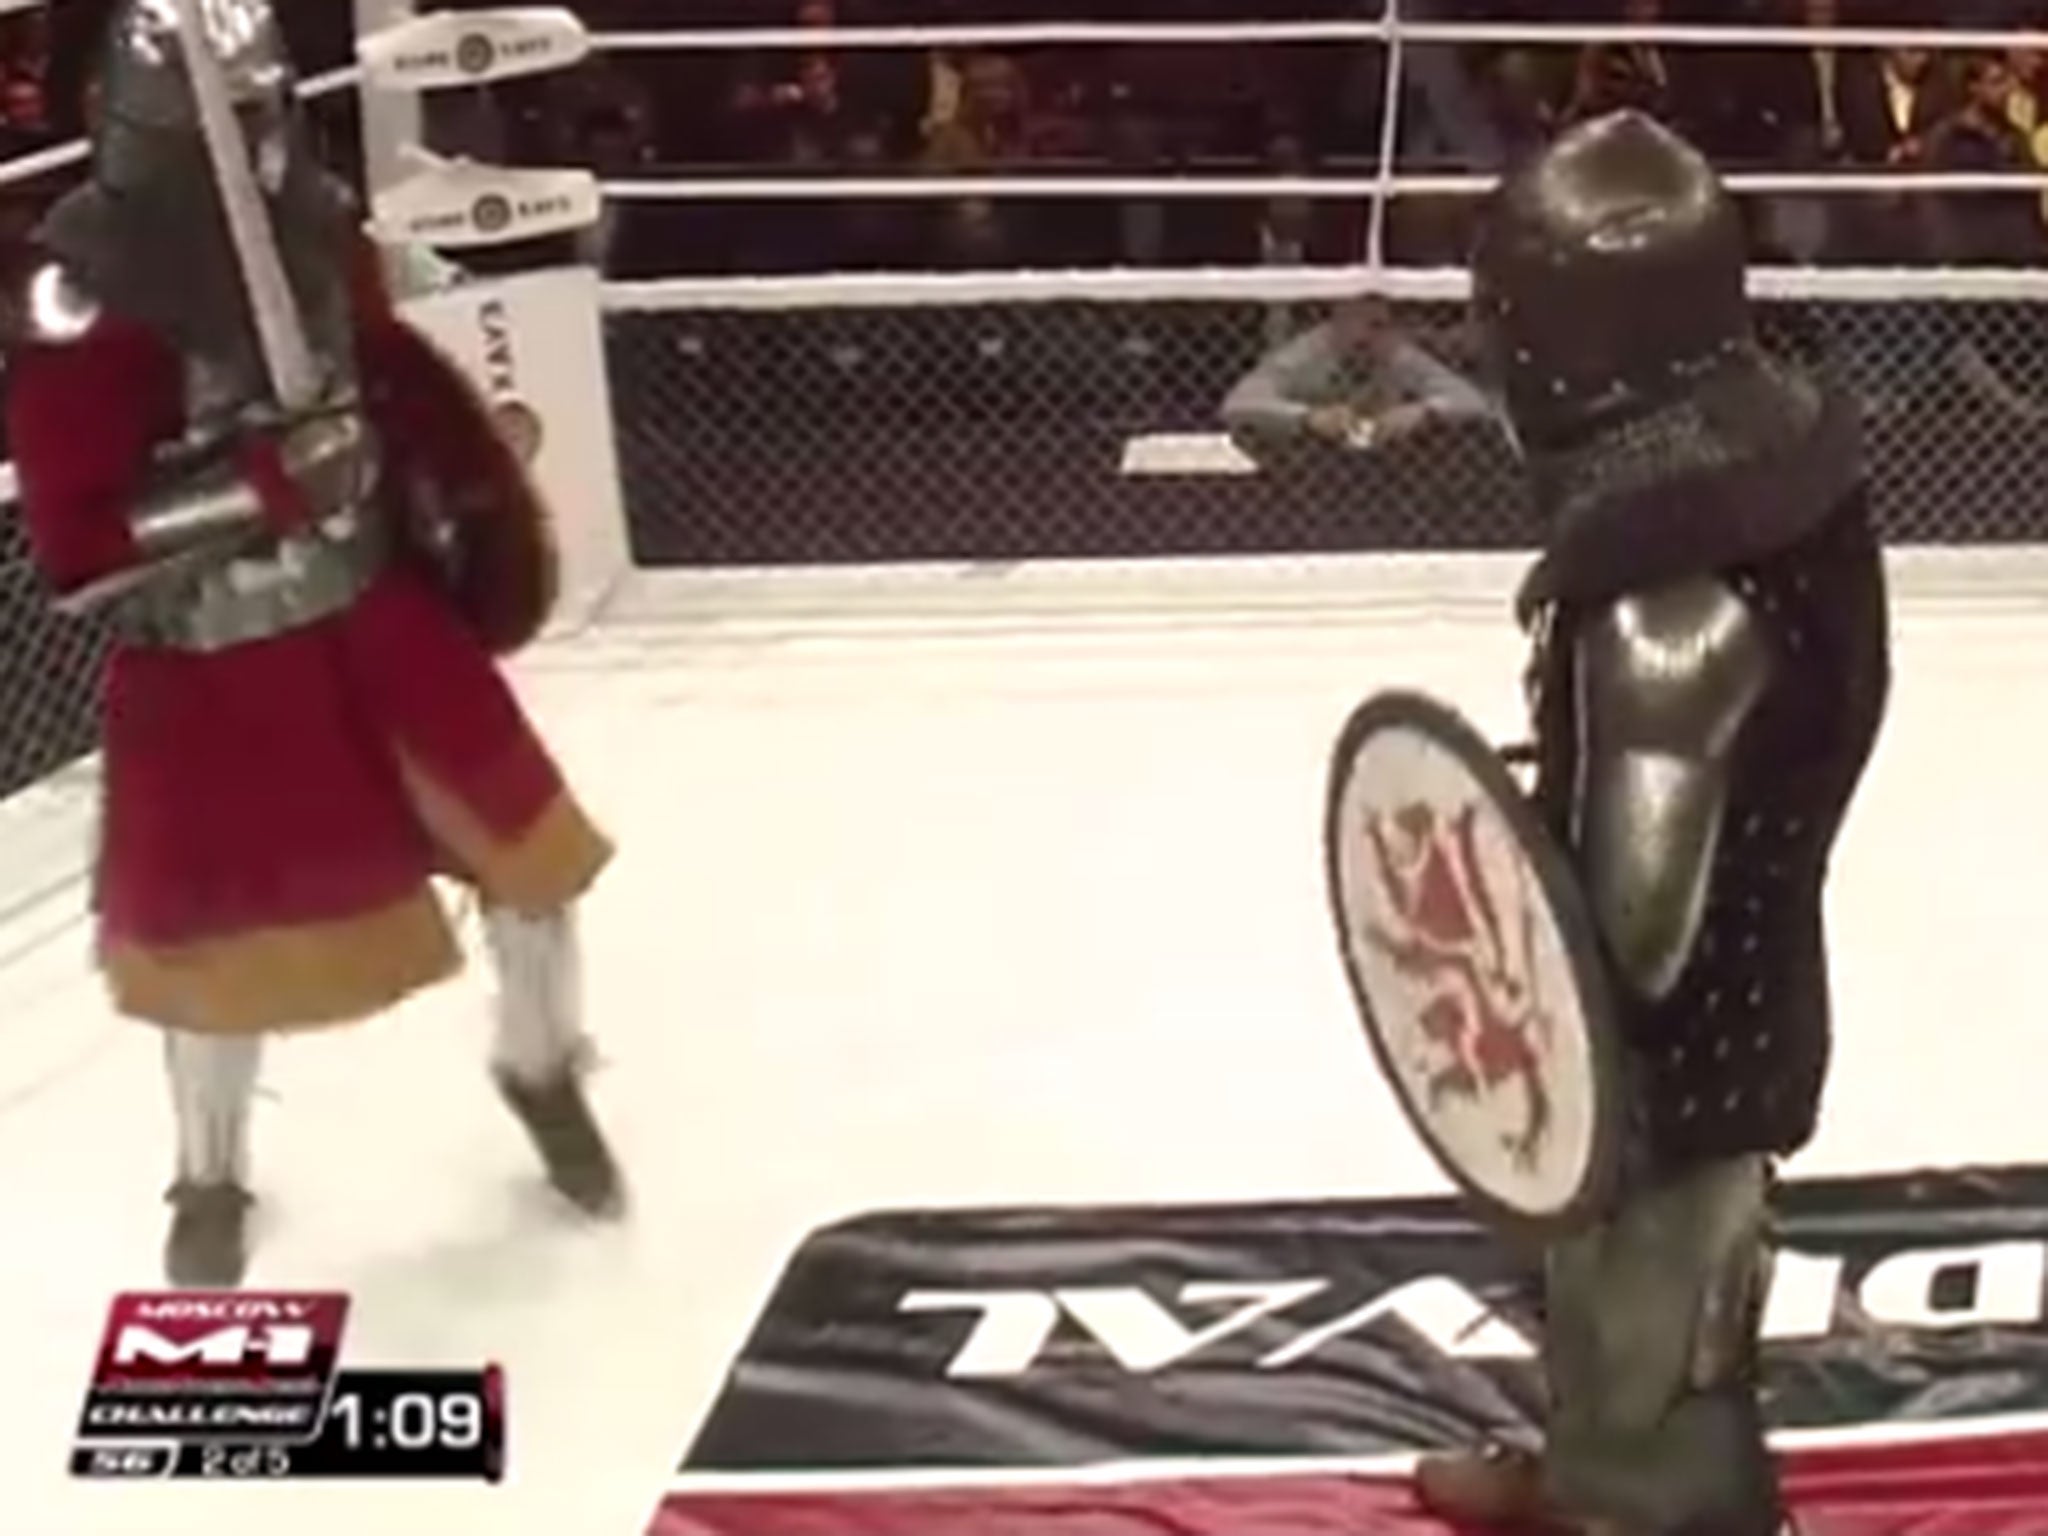 Two 'knights' do battle in an MMA ring